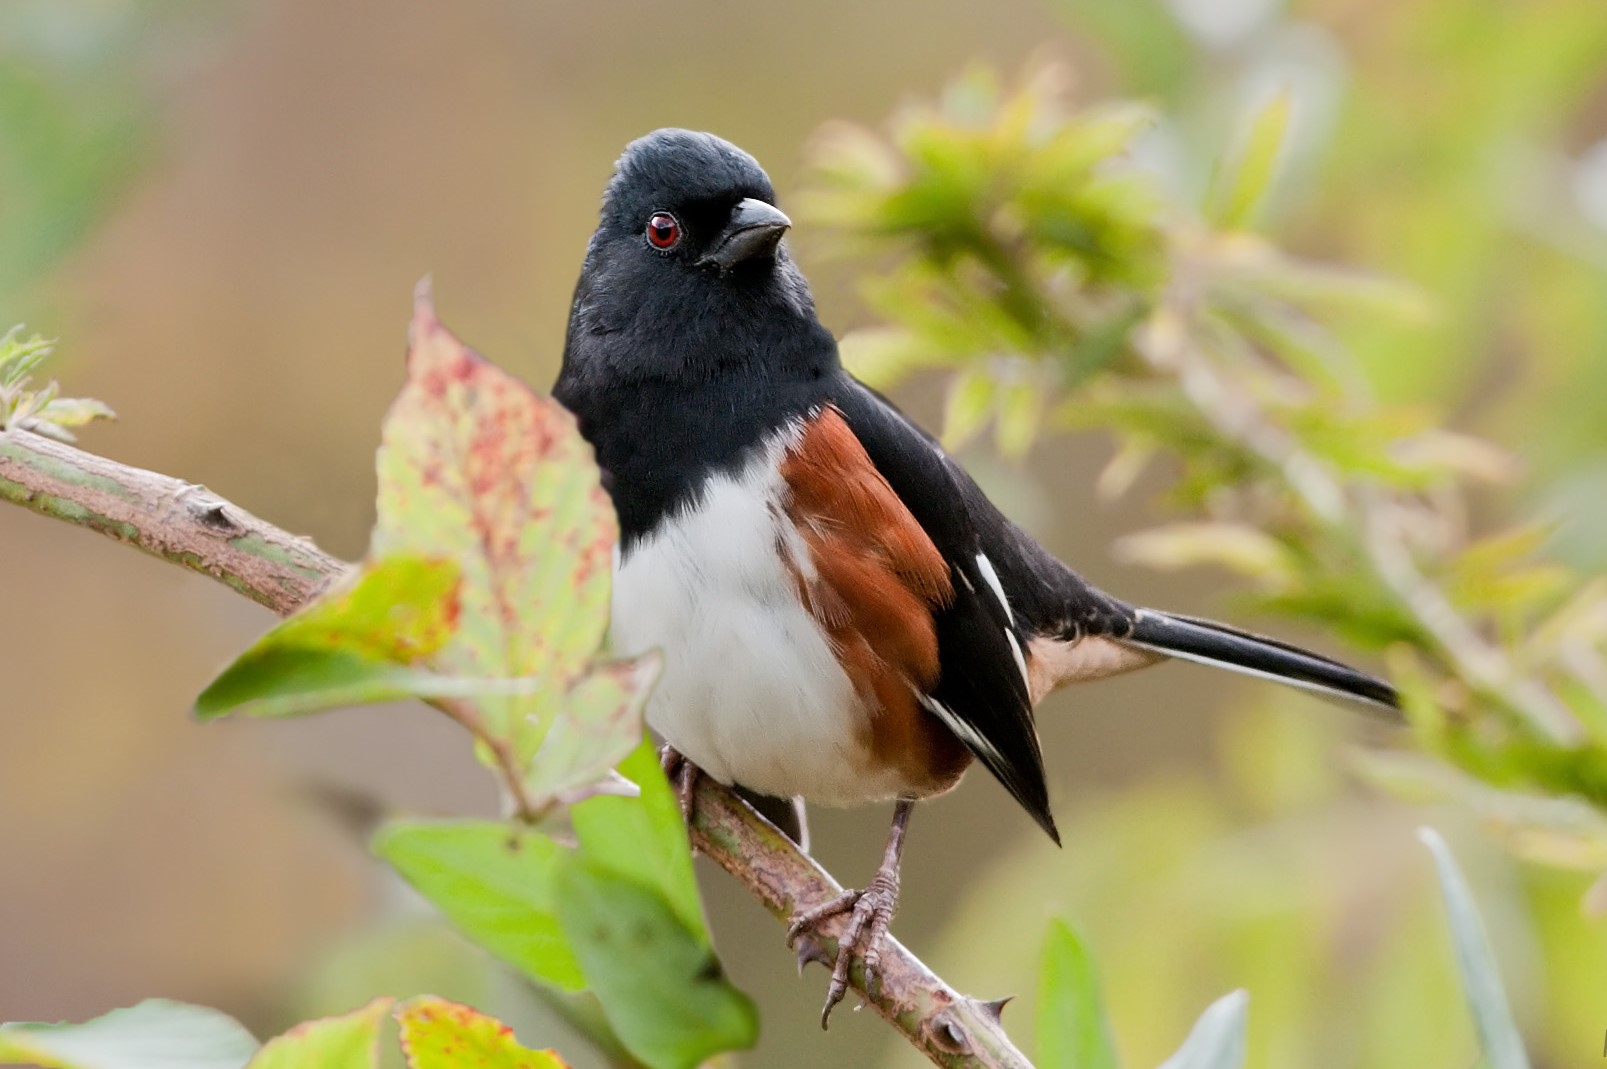 The \"Drink your tea!\" song of the male Eastern Towhee may be heard in Pelham Bay Park during nesting season. Photo: Kelly Colgan Azar/CC BY-ND 2.0